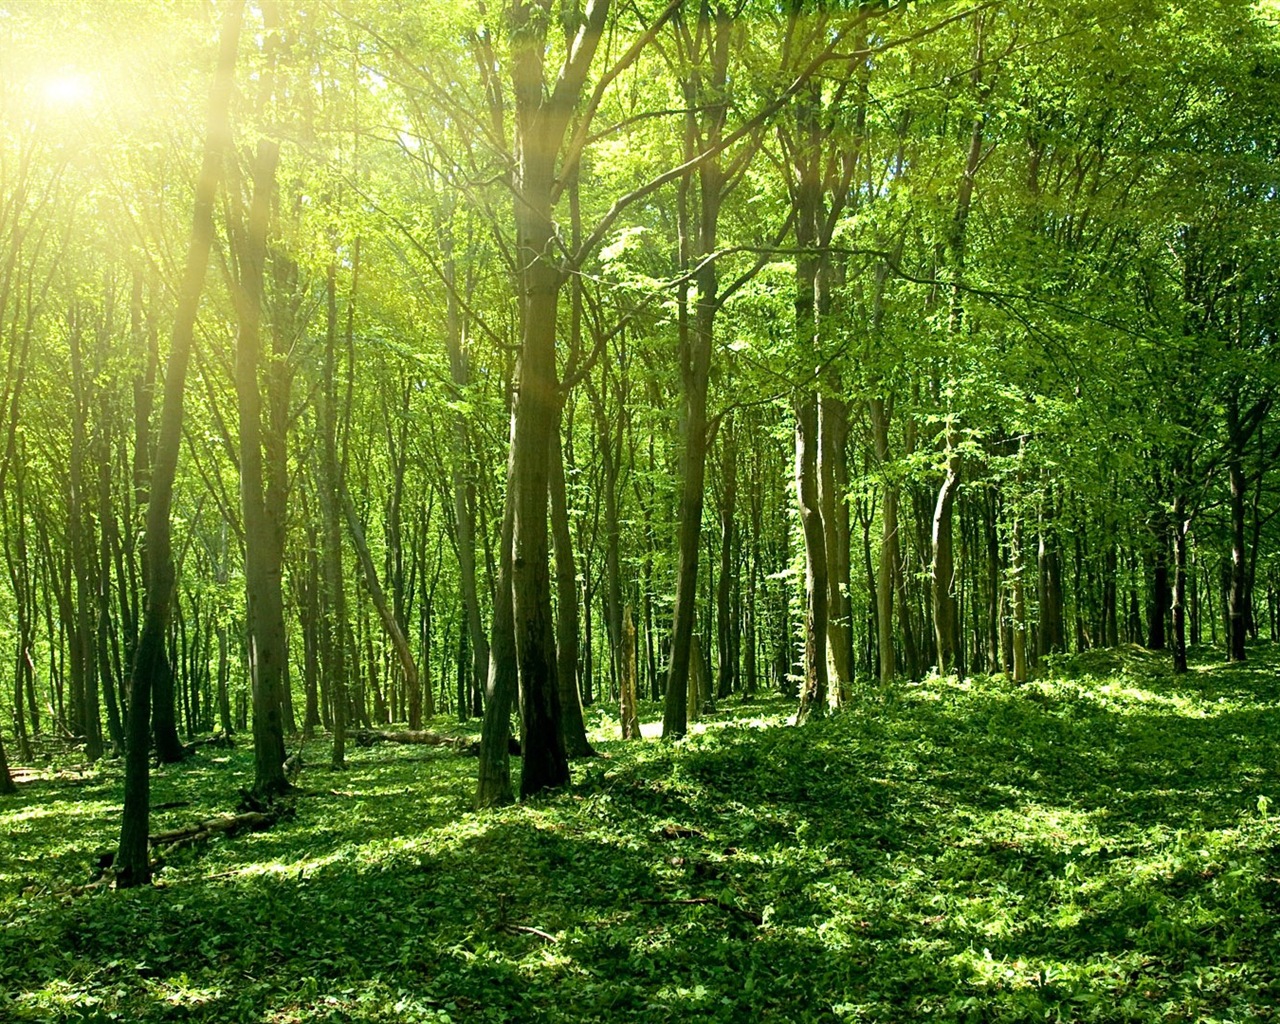 Windows 8 theme forest scenery HD wallpapers #3 - 1280x1024